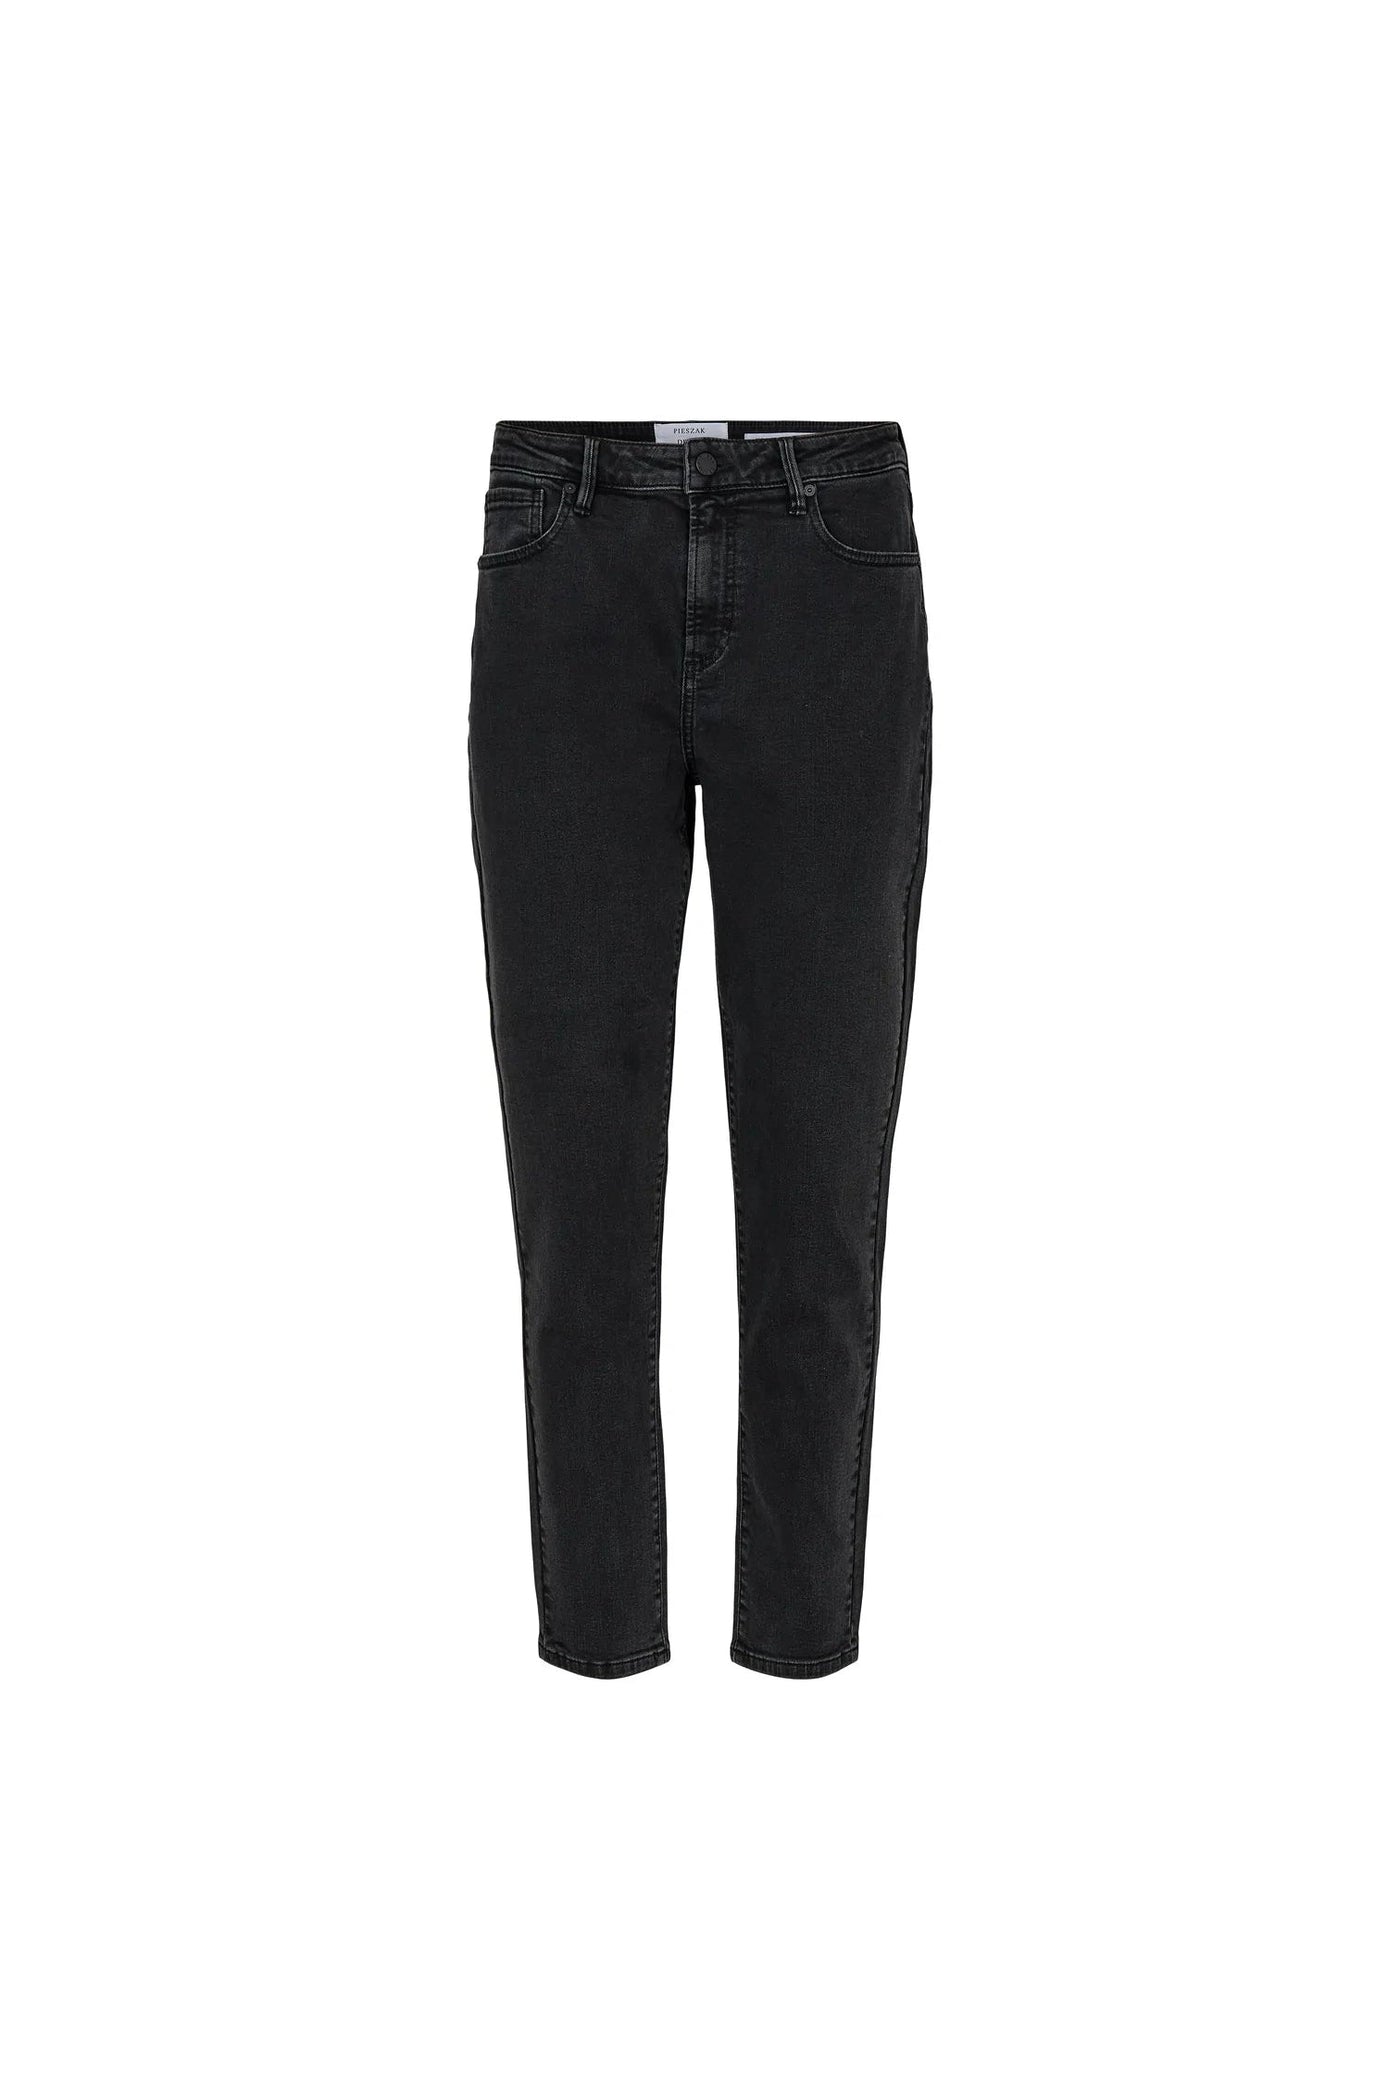 Pieszak PD Brenda Jeans in Organic Black-Womens-Ohh! By Gum - Shop Sustainable